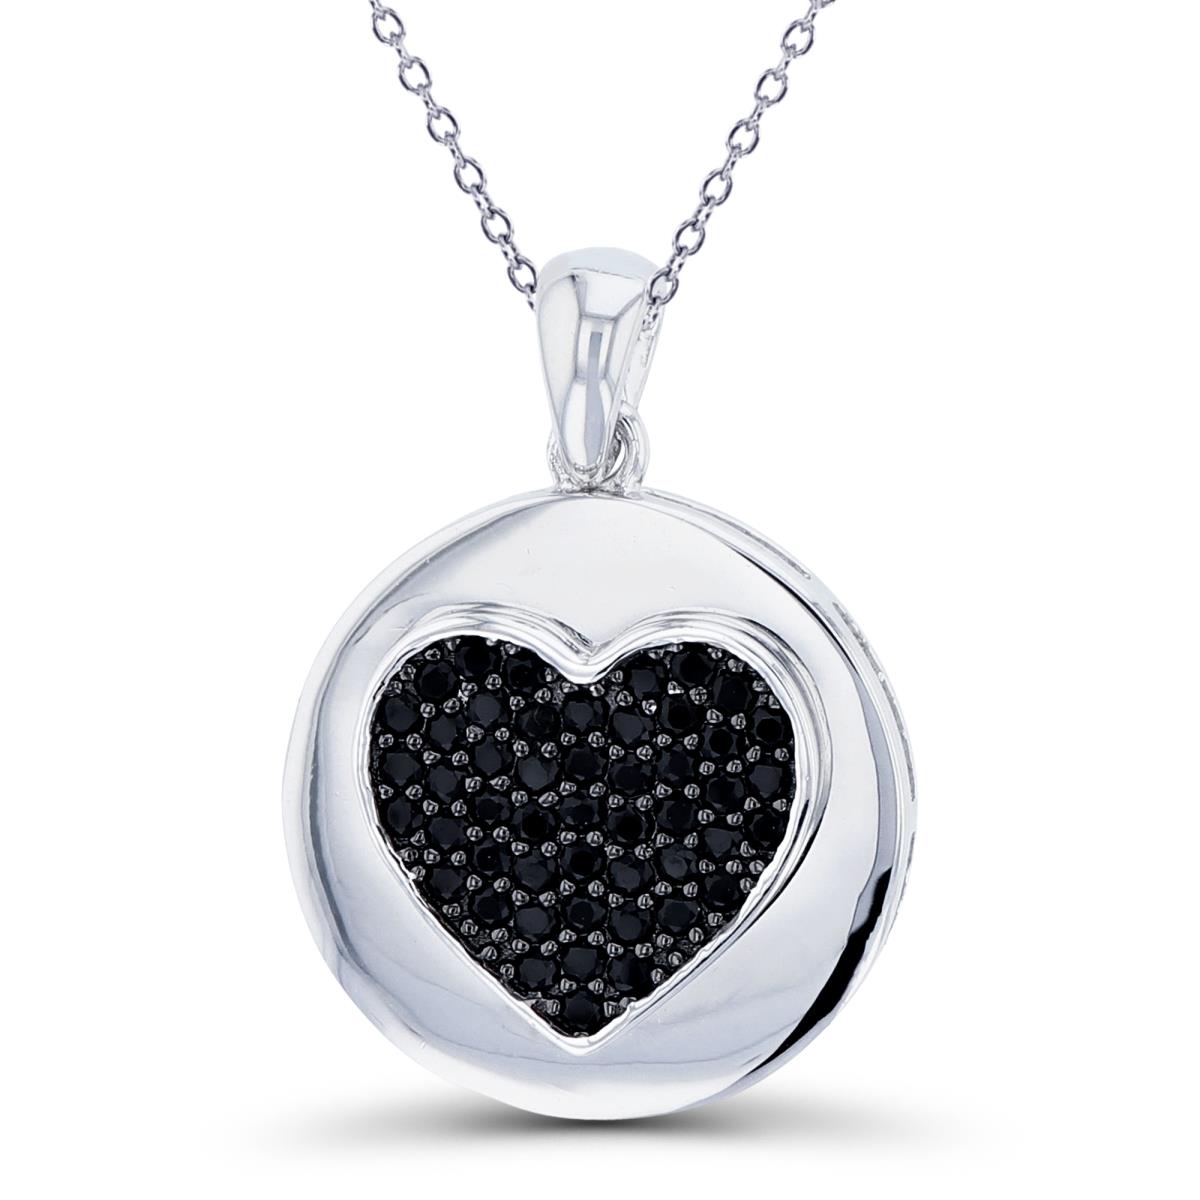 Sterling Silve Two-Tone Rnd Black Spinel Pave Heart on High Polish Circle 18"Necklace